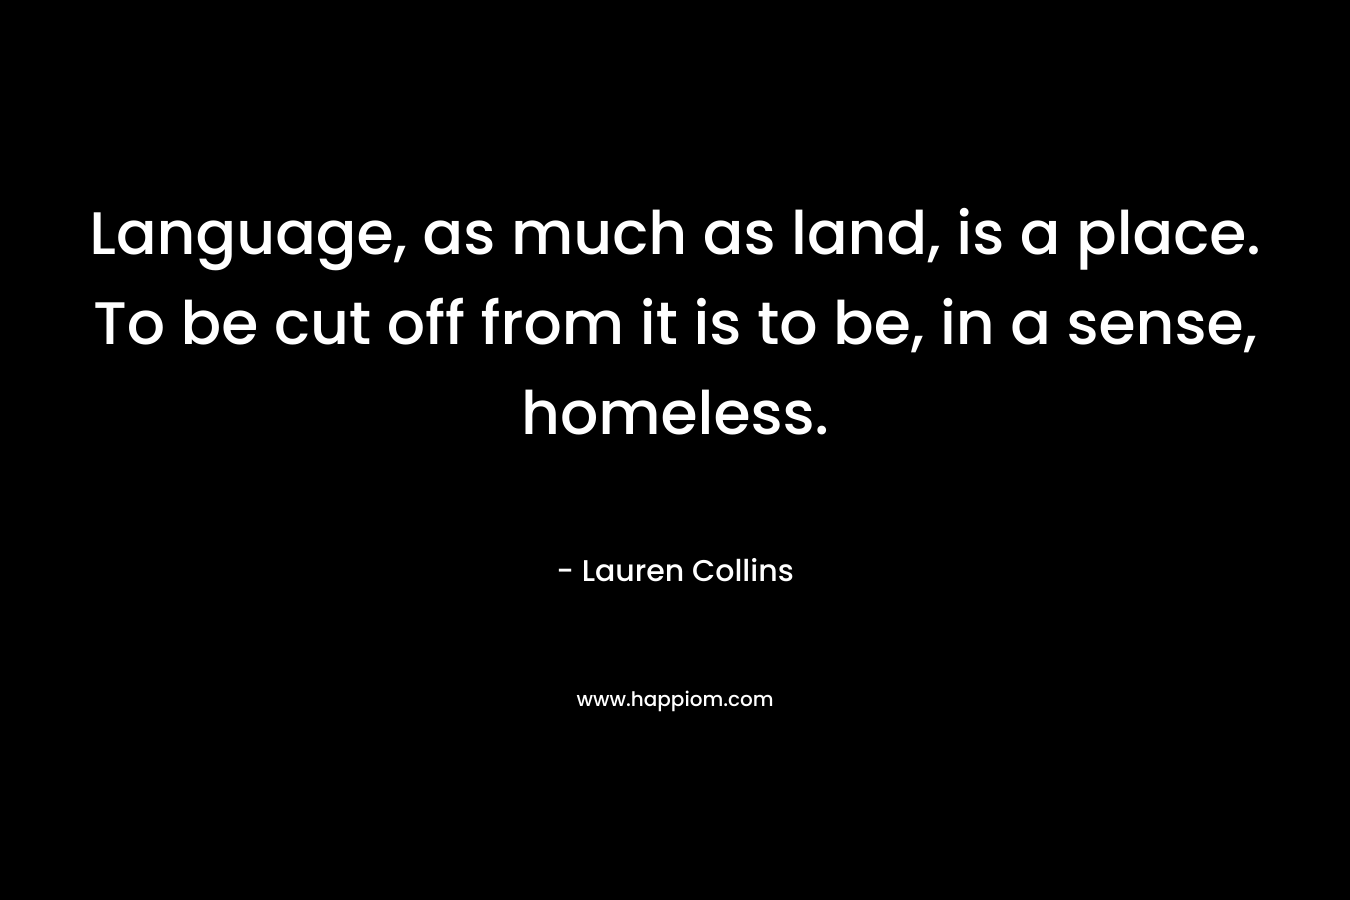 Language, as much as land, is a place. To be cut off from it is to be, in a sense, homeless.